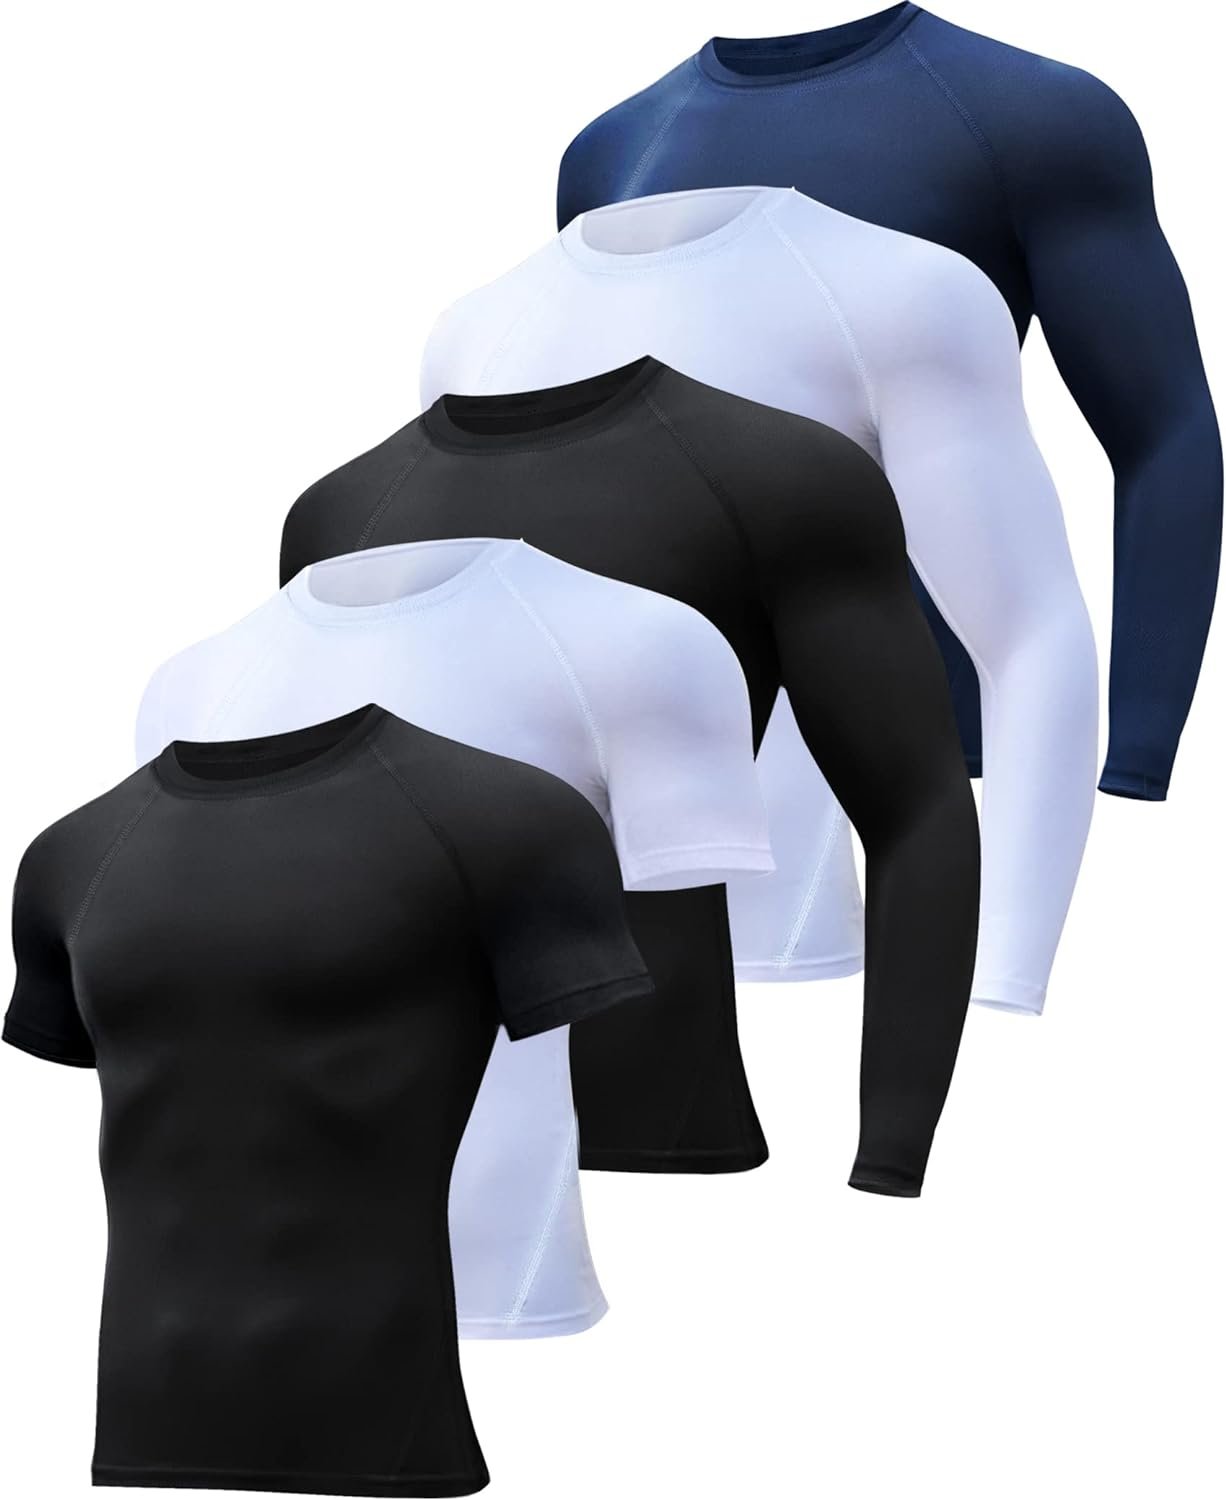 4 Pack Workout Compression Shirts Men Review